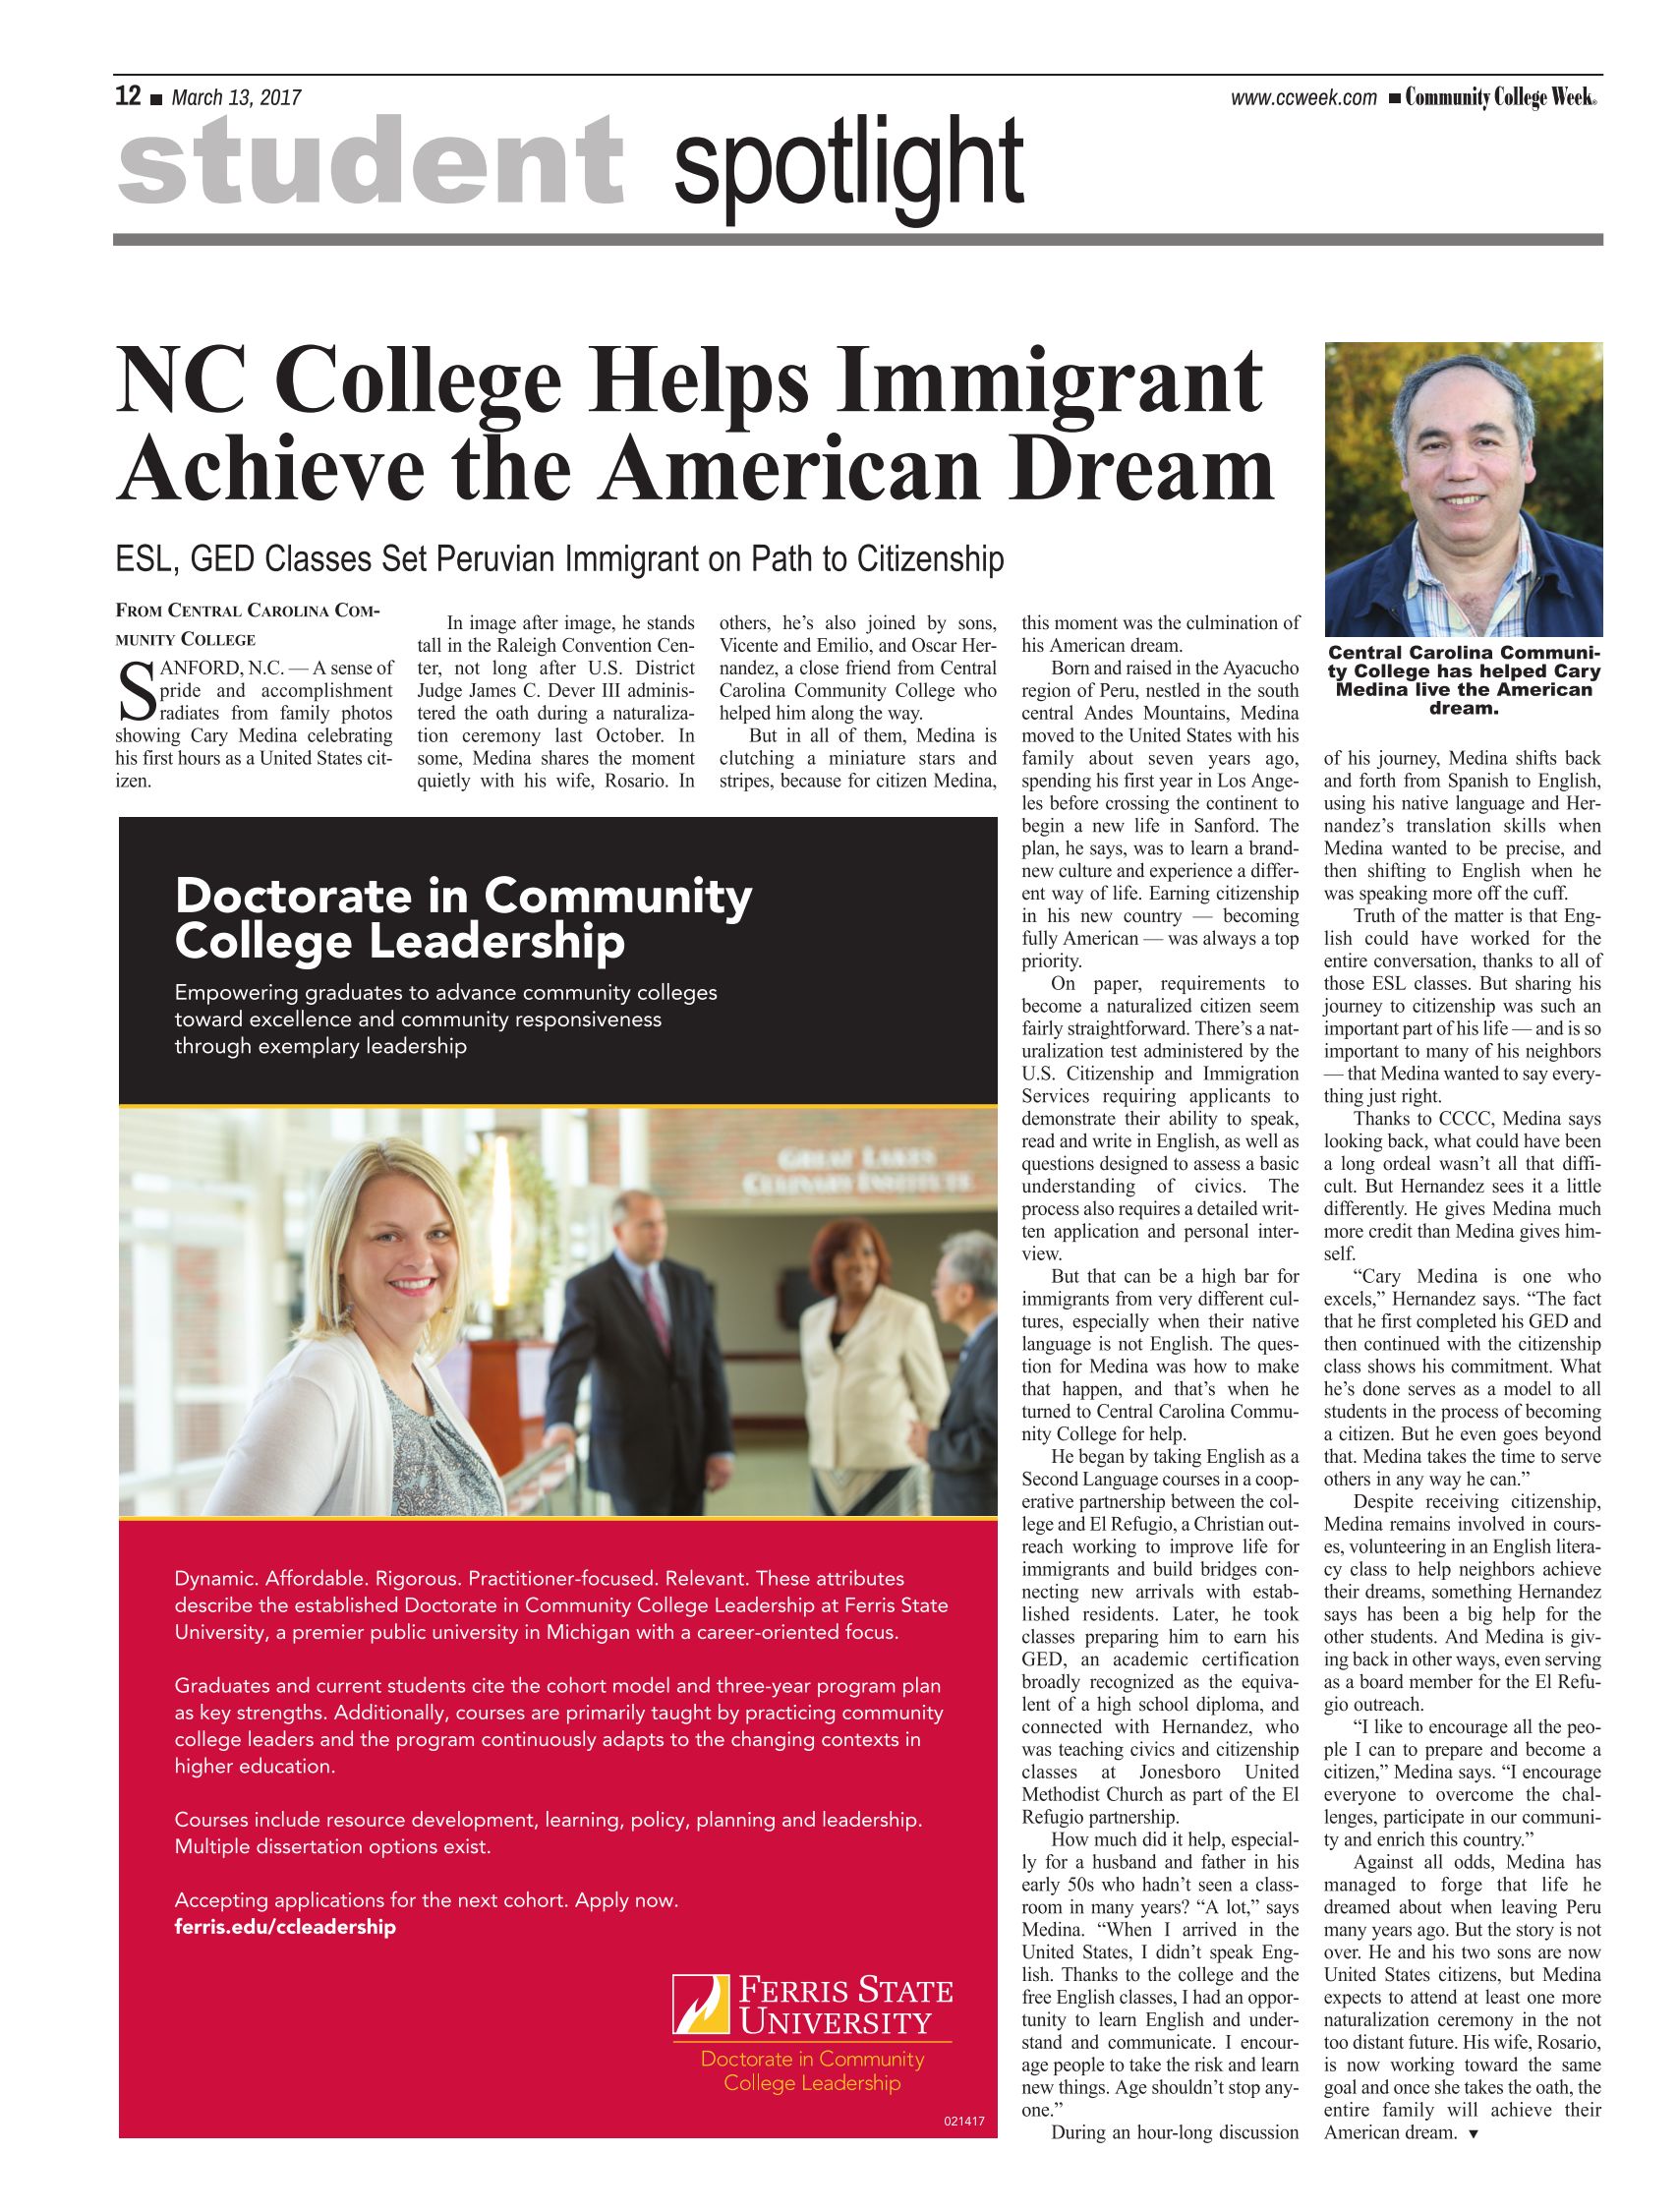 CCCC Helps Achieve the American Dream